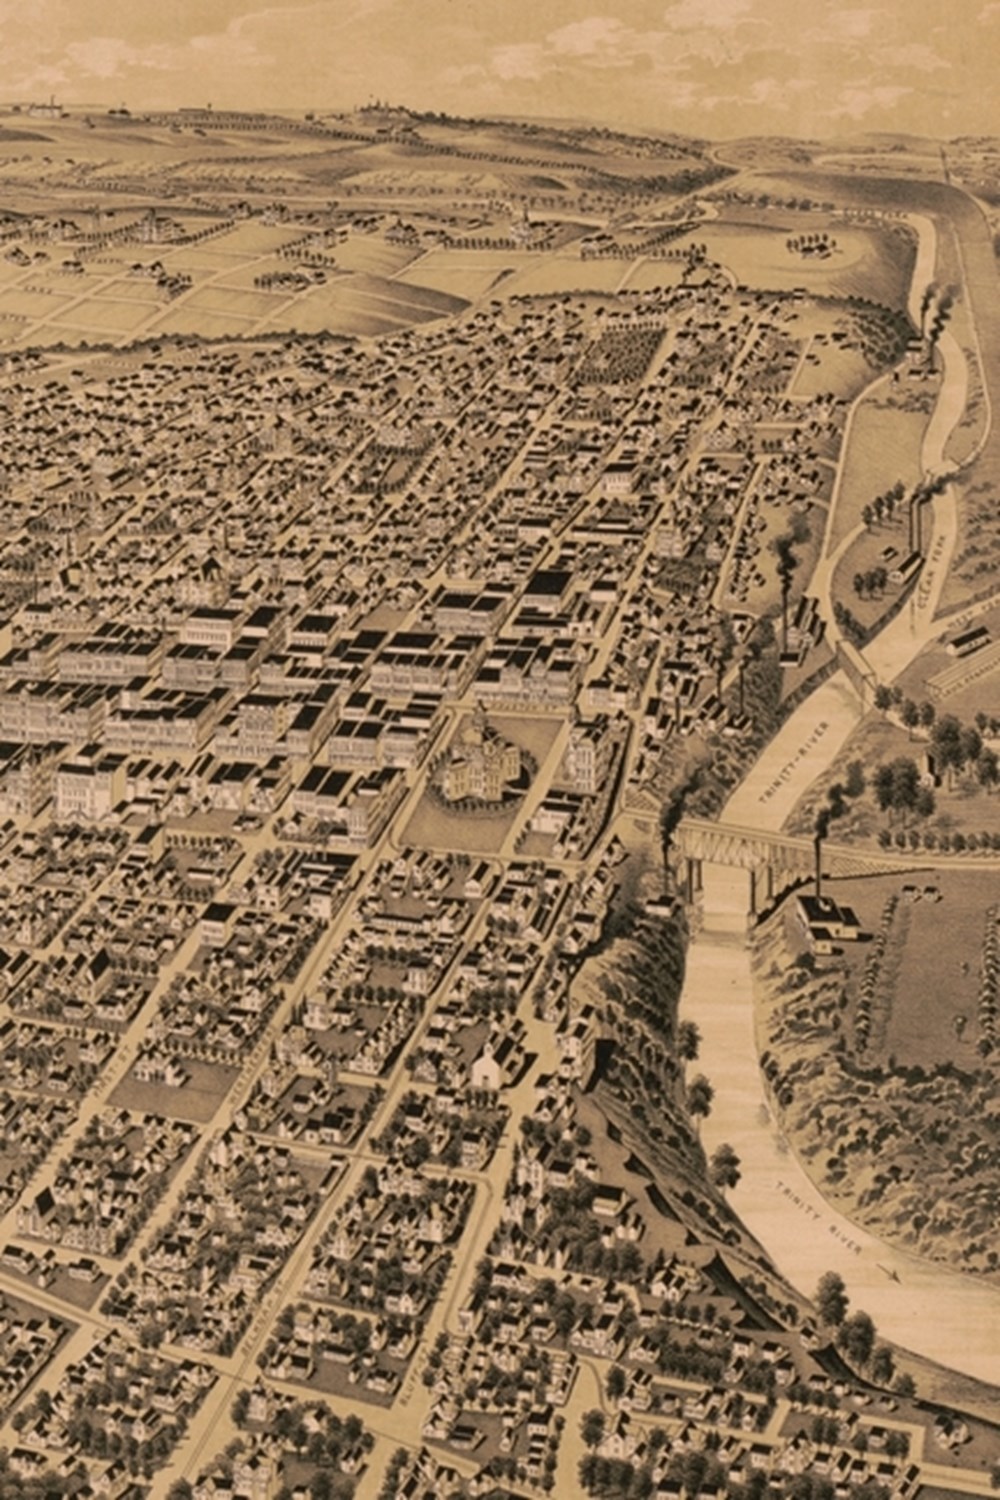 1891 Bird's Eye View Map of Fort Worth, Texas - A Poetose Notebook / Journal / Diary (50 pages/25 sh